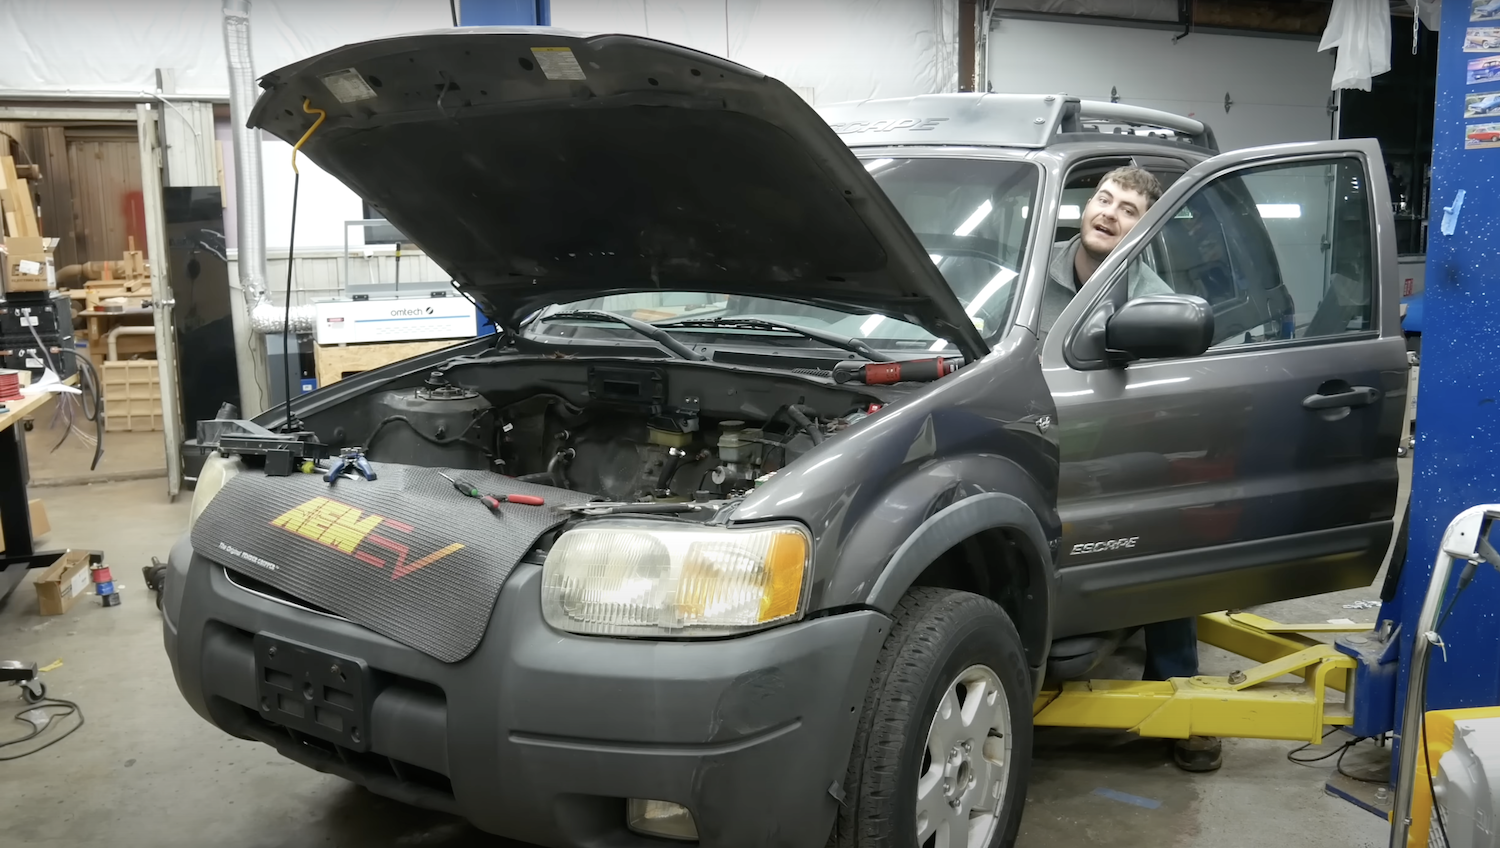 900 HP Electric Ford Escape Project Gains New Parts: Video